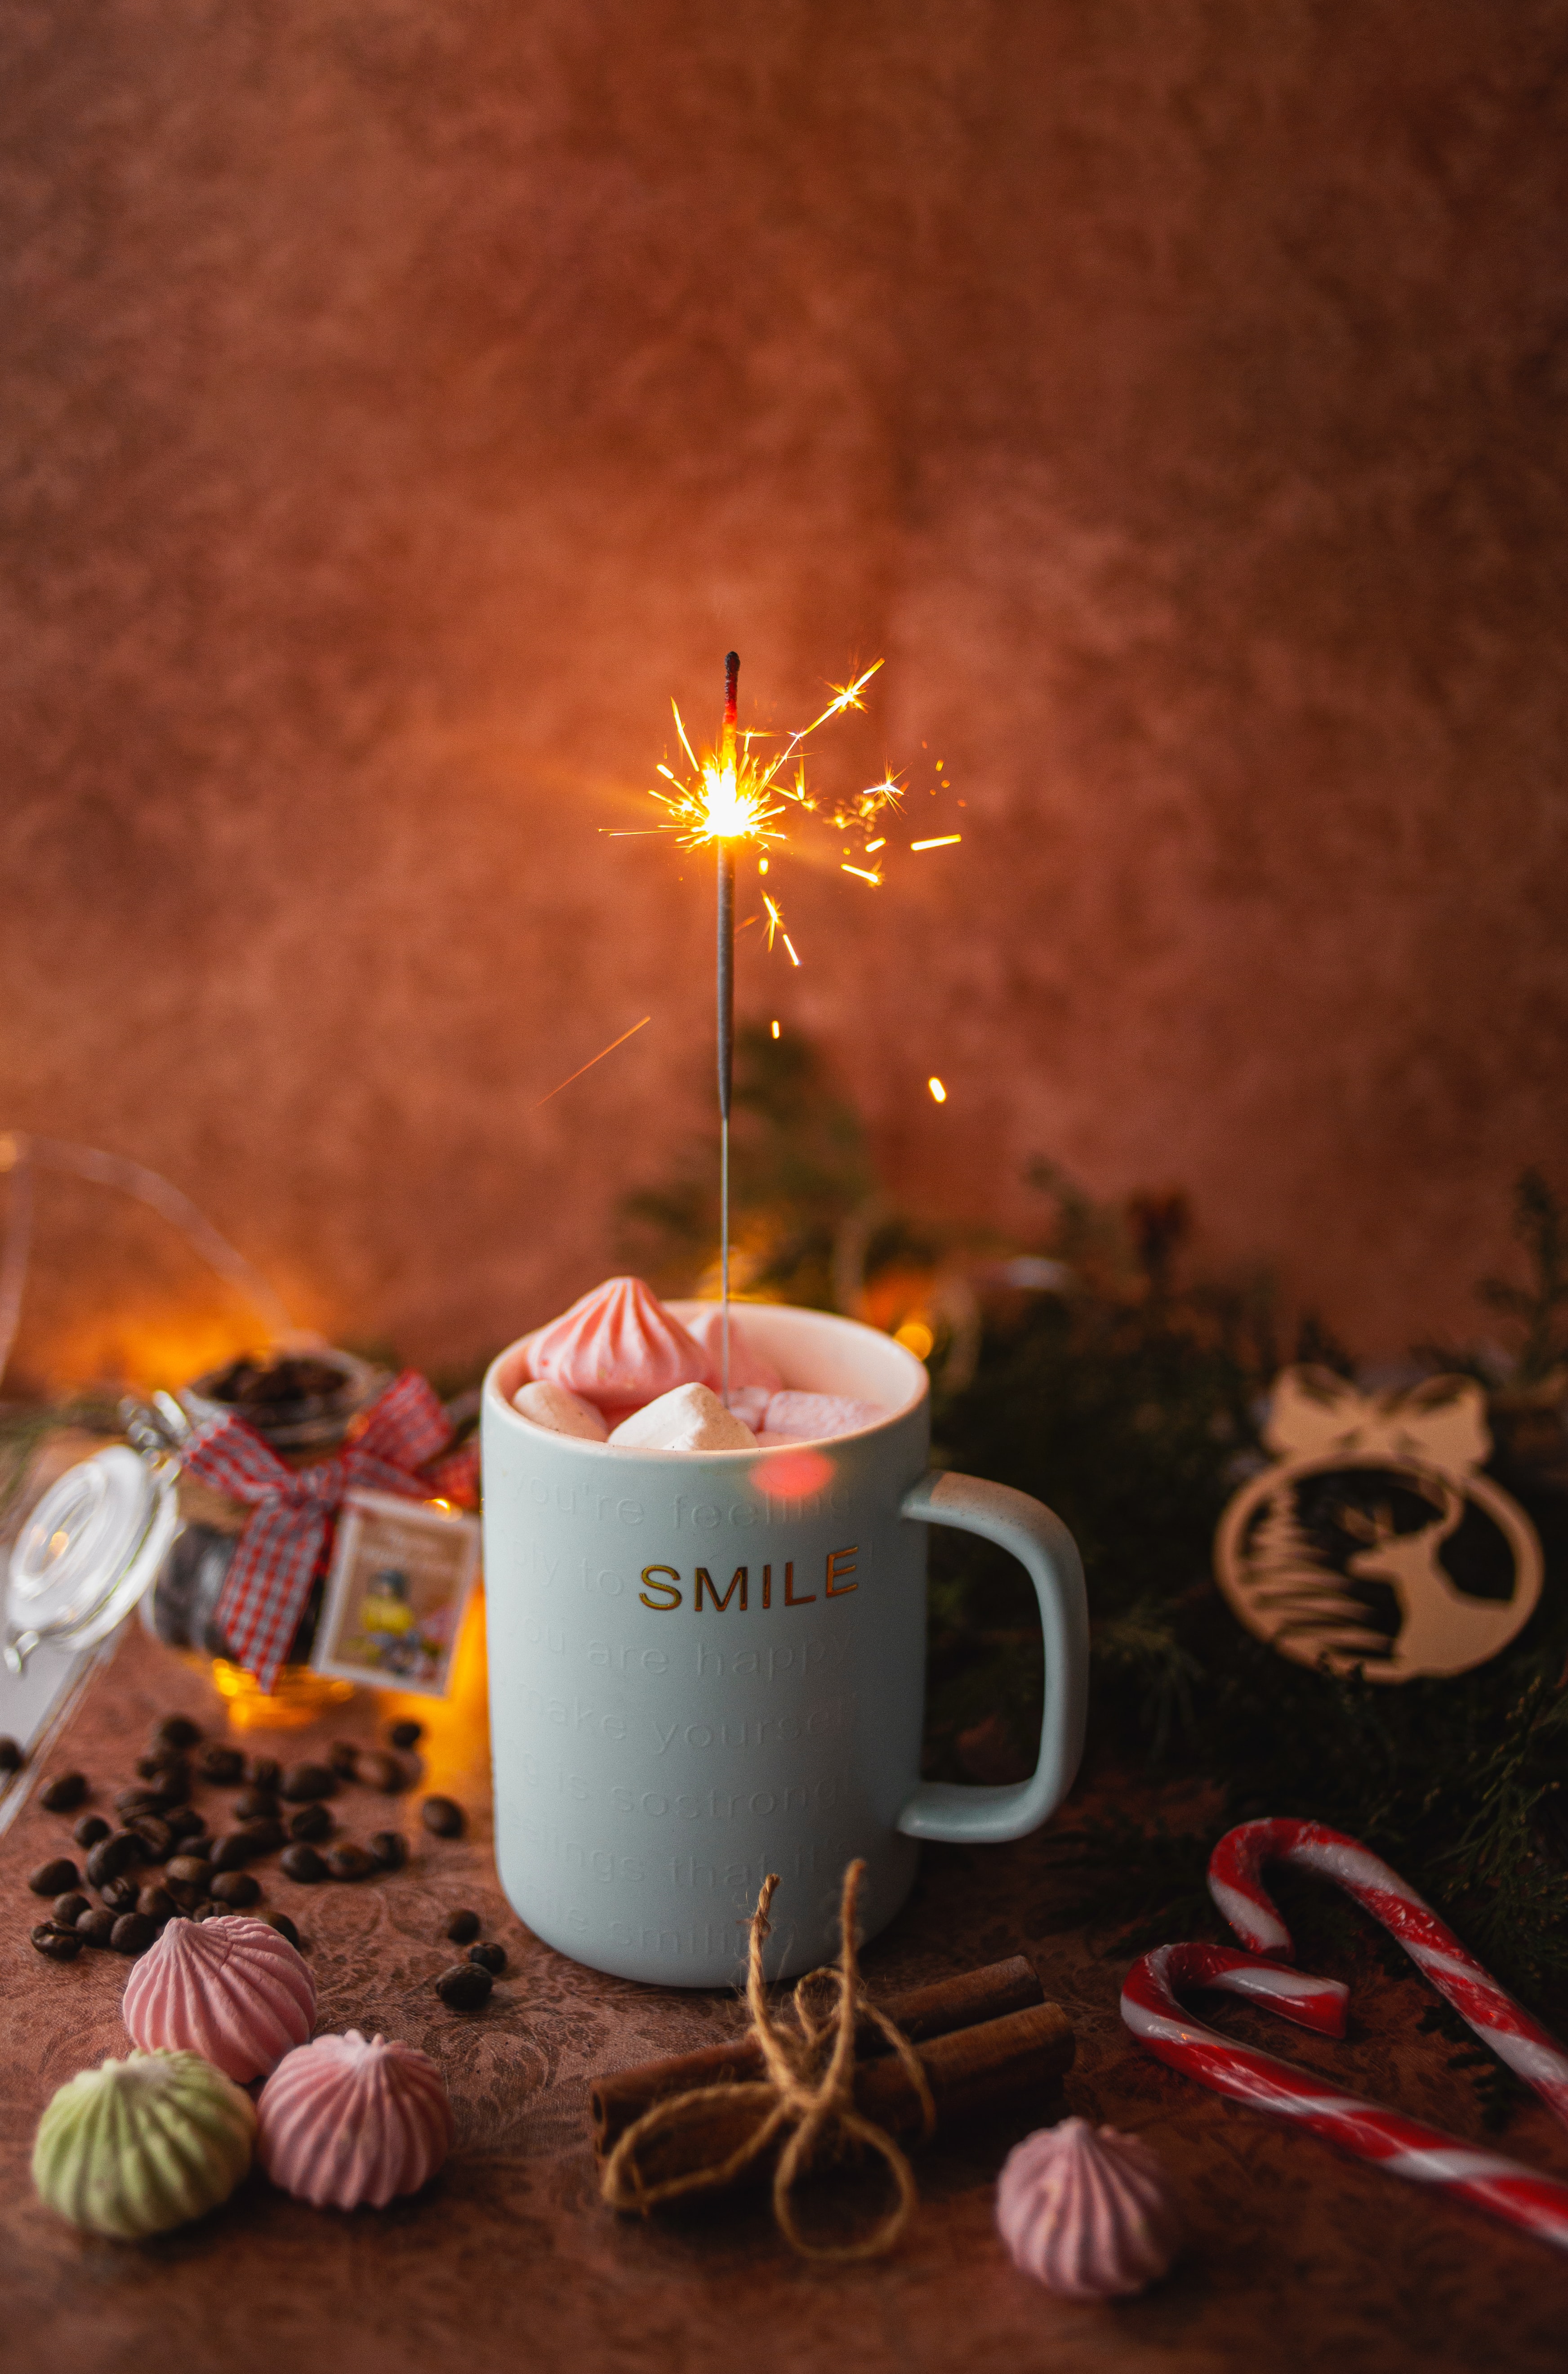 android miscellanea, mug, holiday, sparks, cup, miscellaneous, marshmallow, bengal lights, sparklers, zephyr